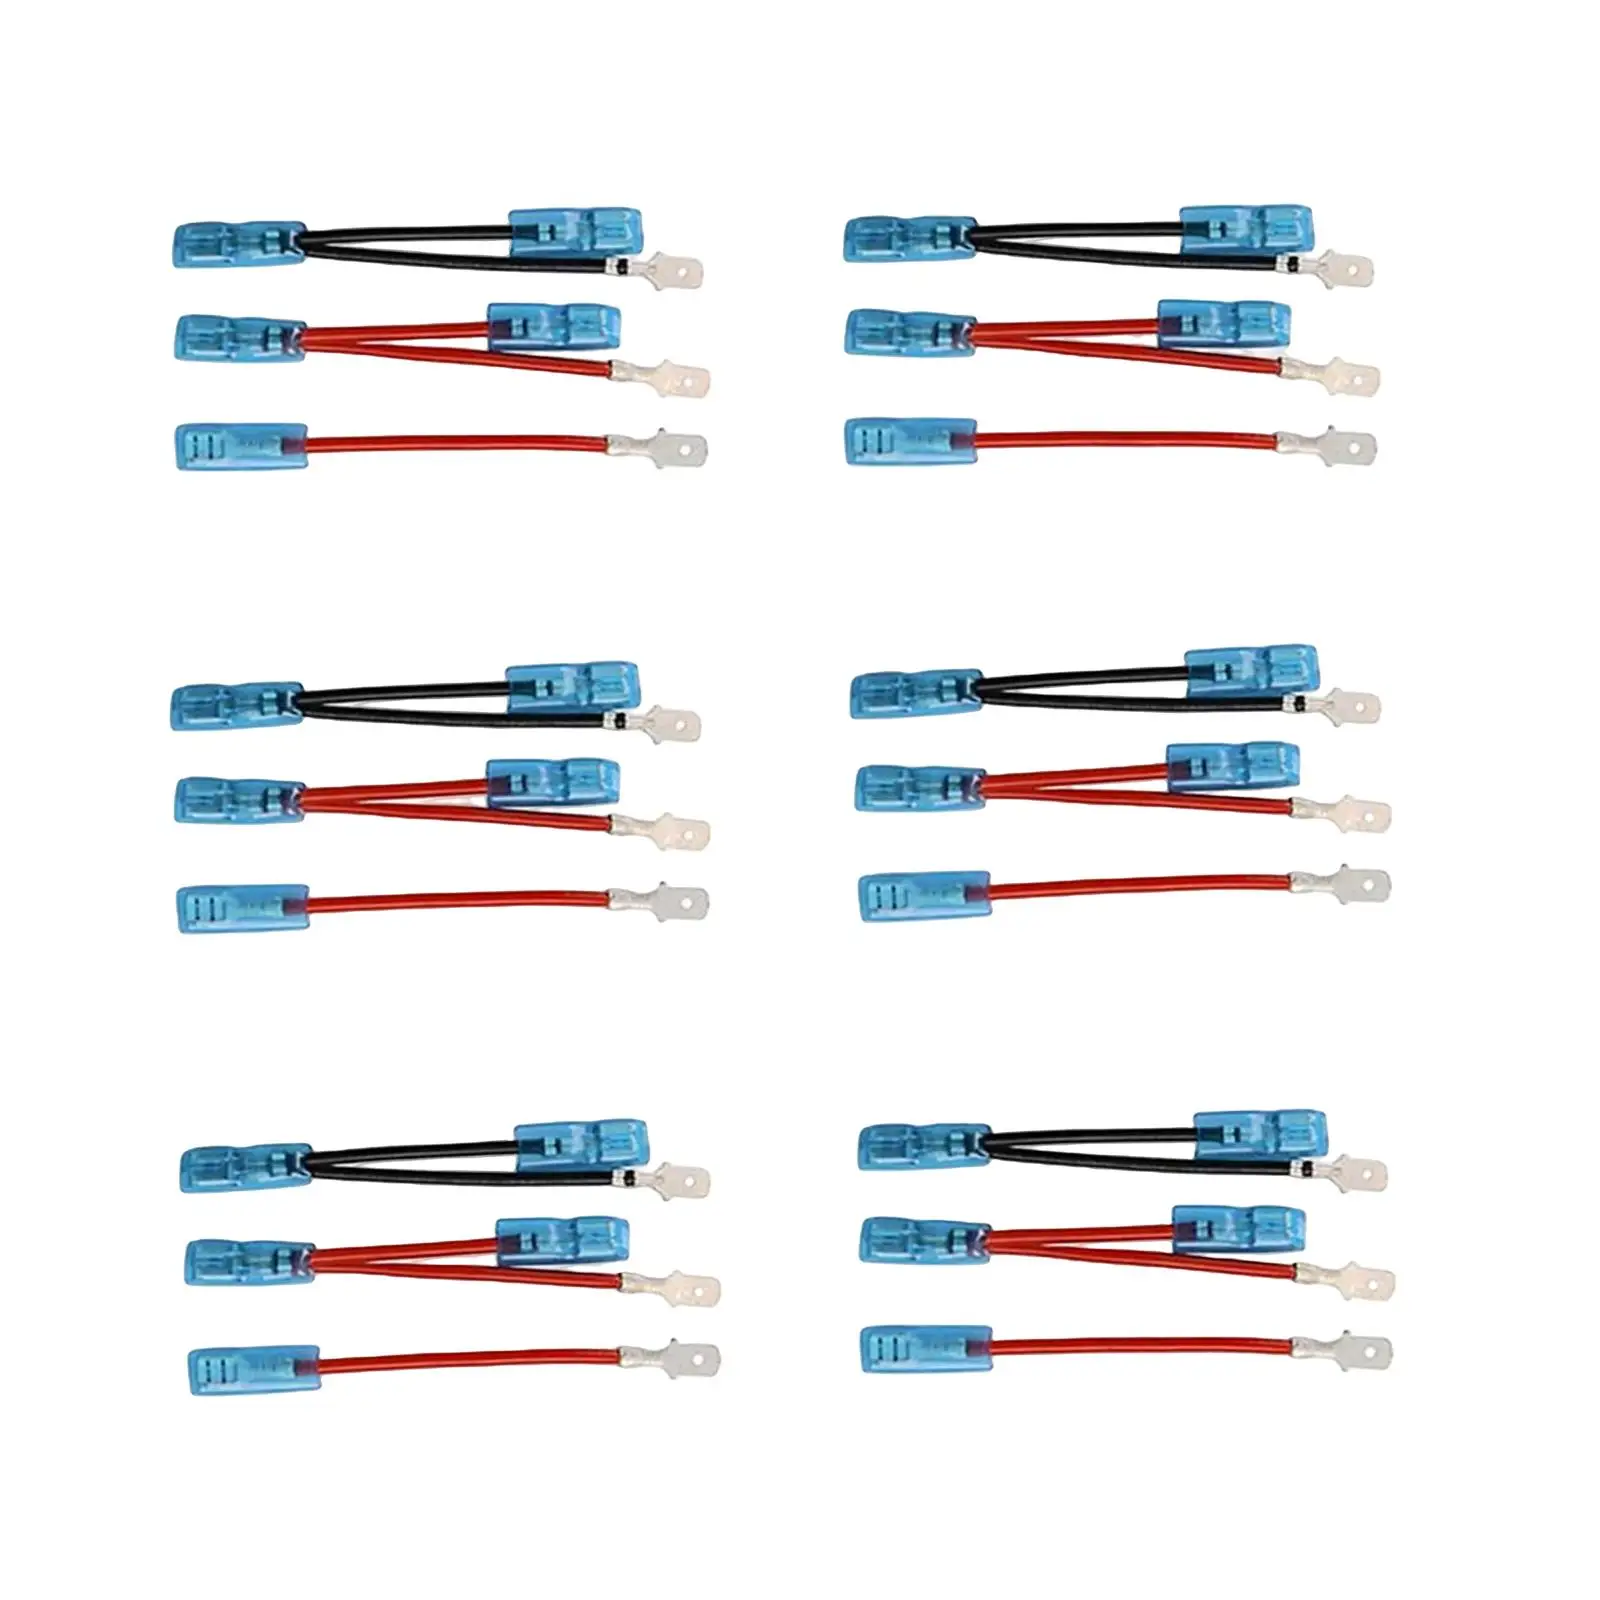 6x 5 Pin Rocker Switch Jumper Wires Set Replacement Professional On Off Rocker Switch Wiring for Marine Trucks Yachts ATV